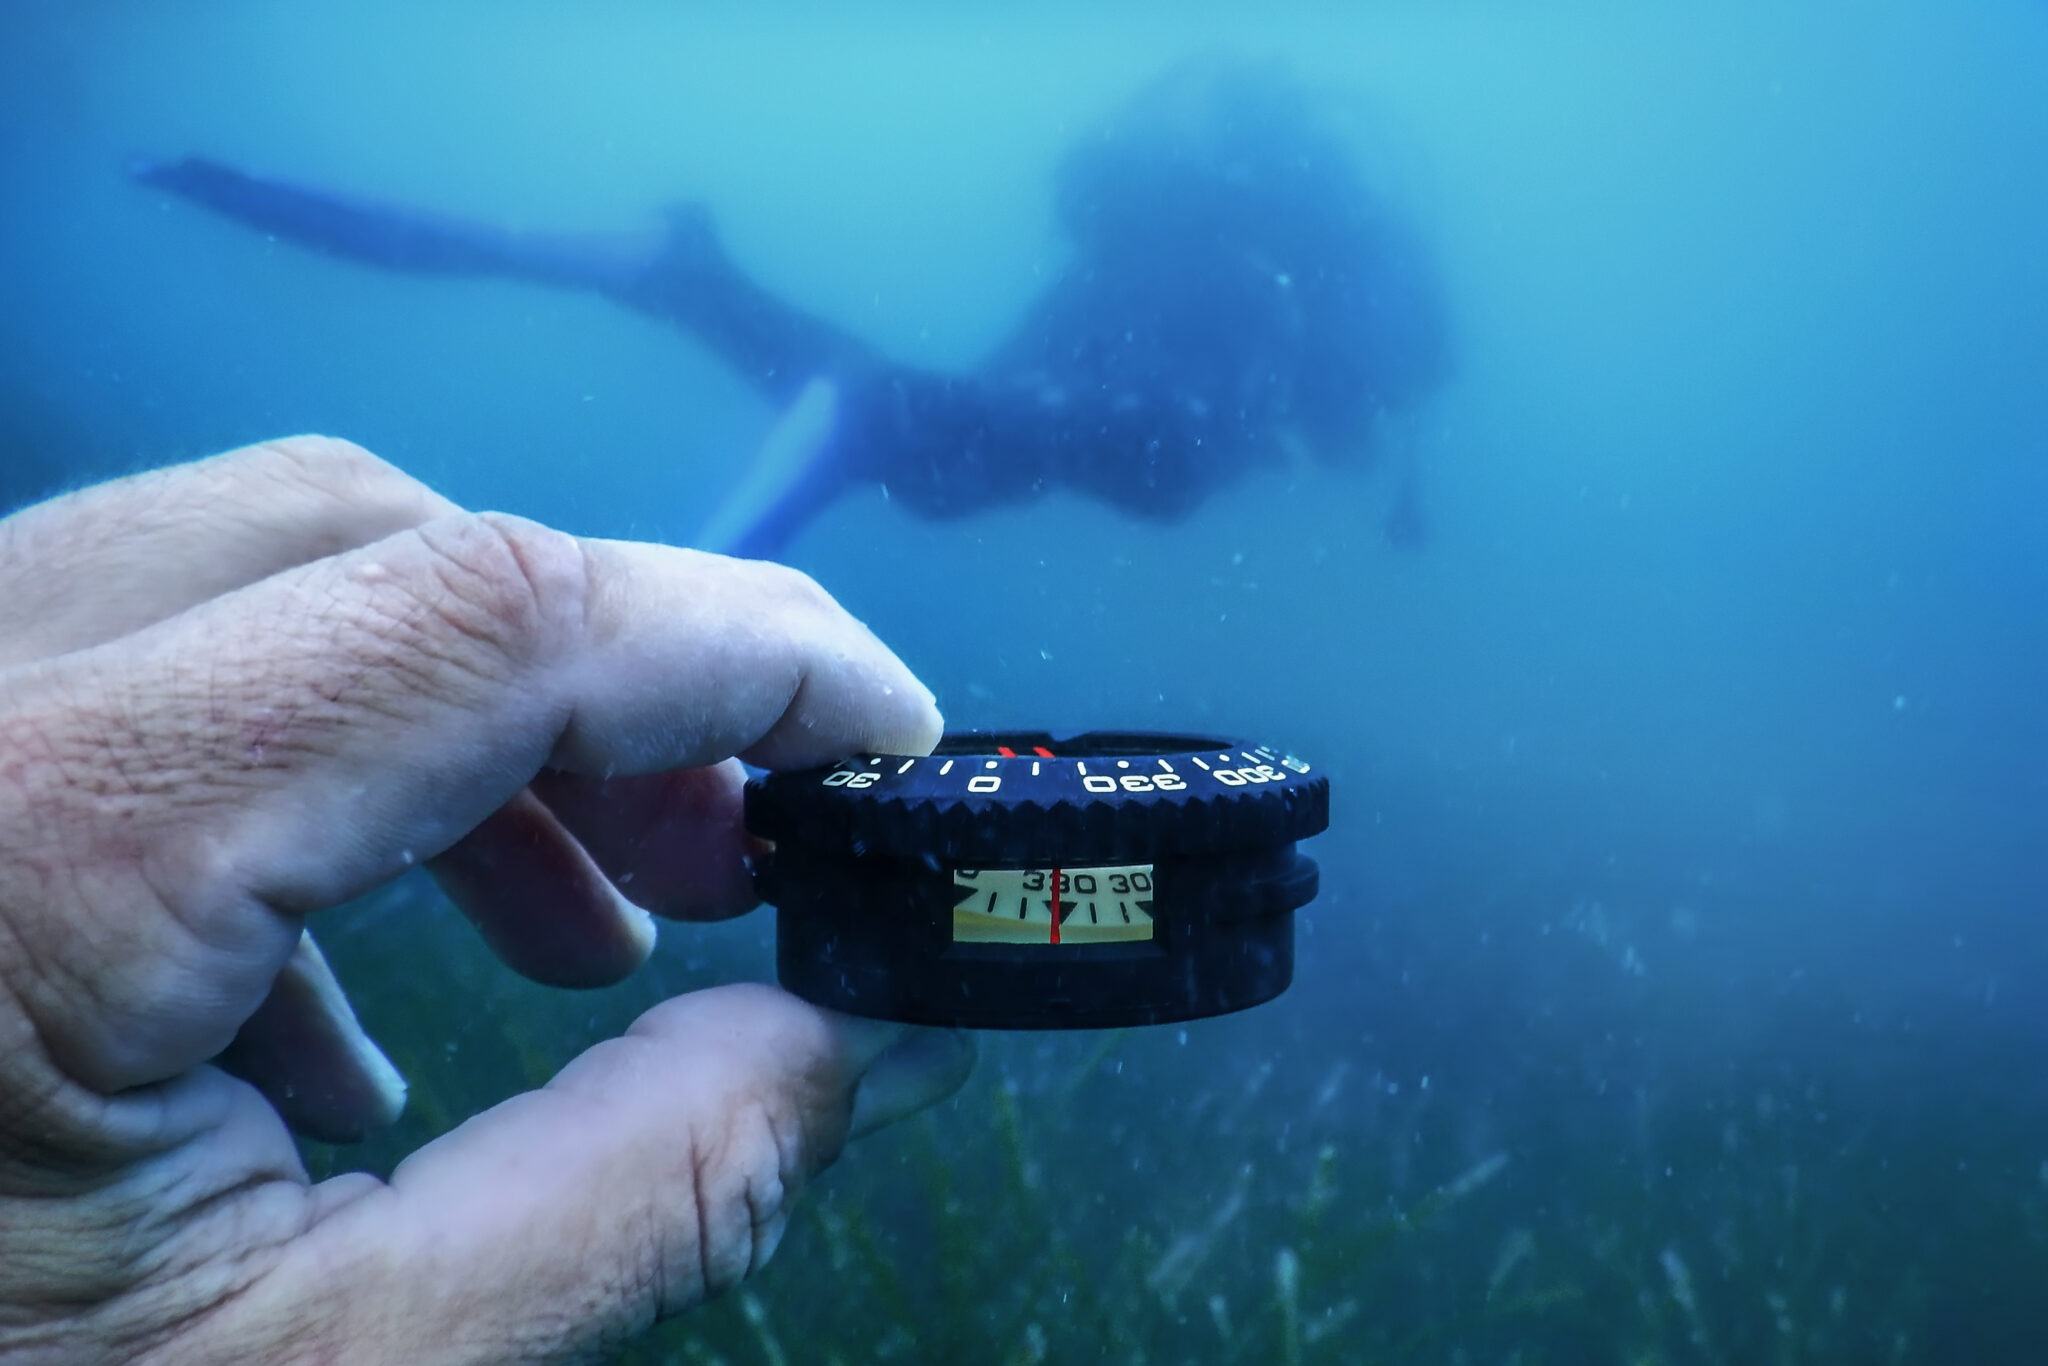 a scuba diver looks at his underwater compass to aid in underwater navigation. Another diver is in front of the compass.